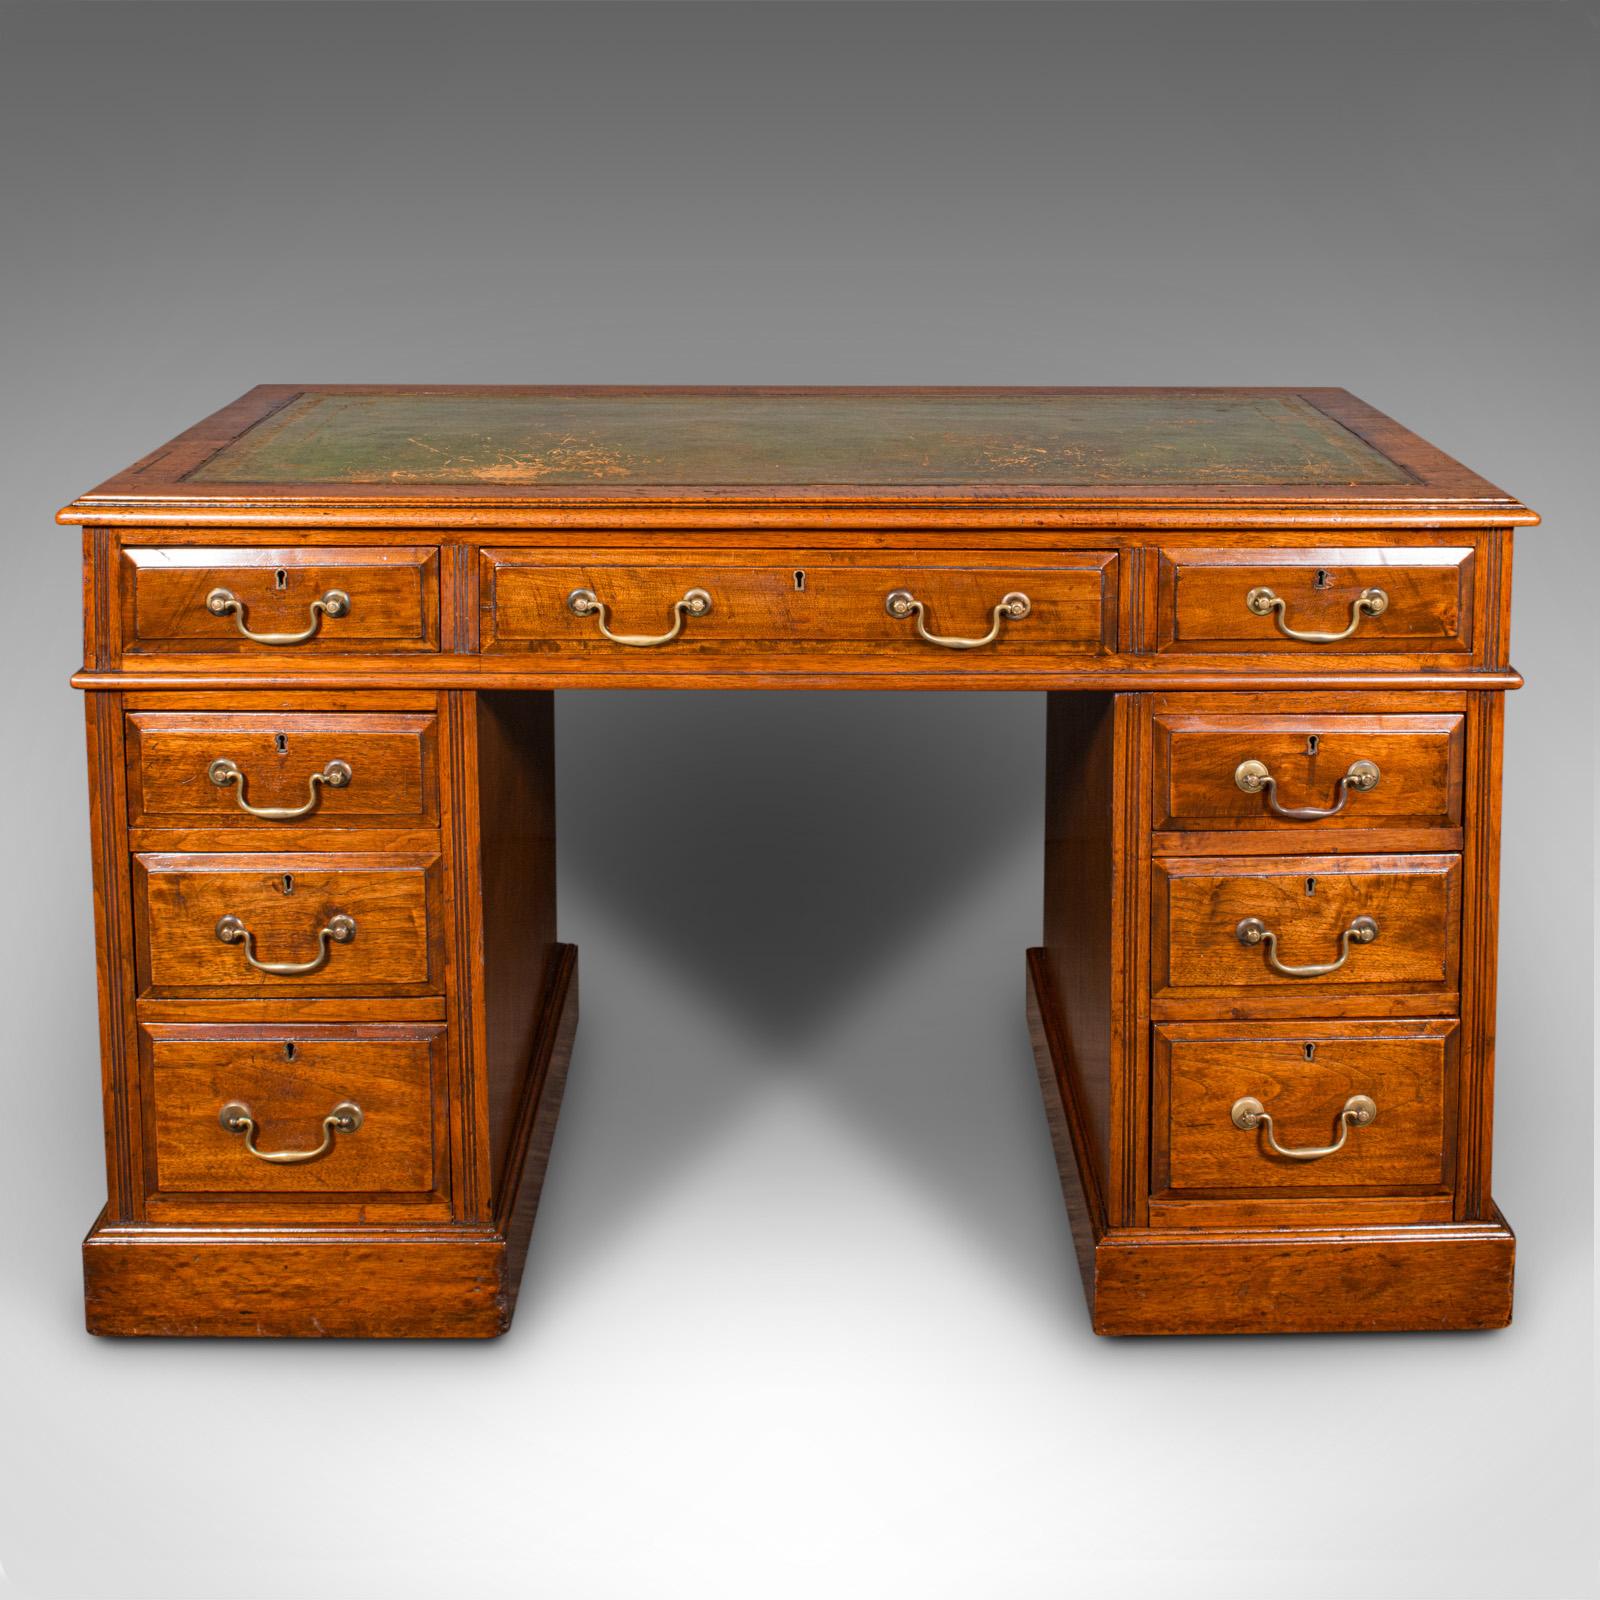 This is an antique twin pedestal desk. An English, mahogany and leather office writing table, dating to the Victorian period, circa 1880.

Classic pedestal desk, pleasingly appointed for home office use
Displaying a desirable aged patina and in good